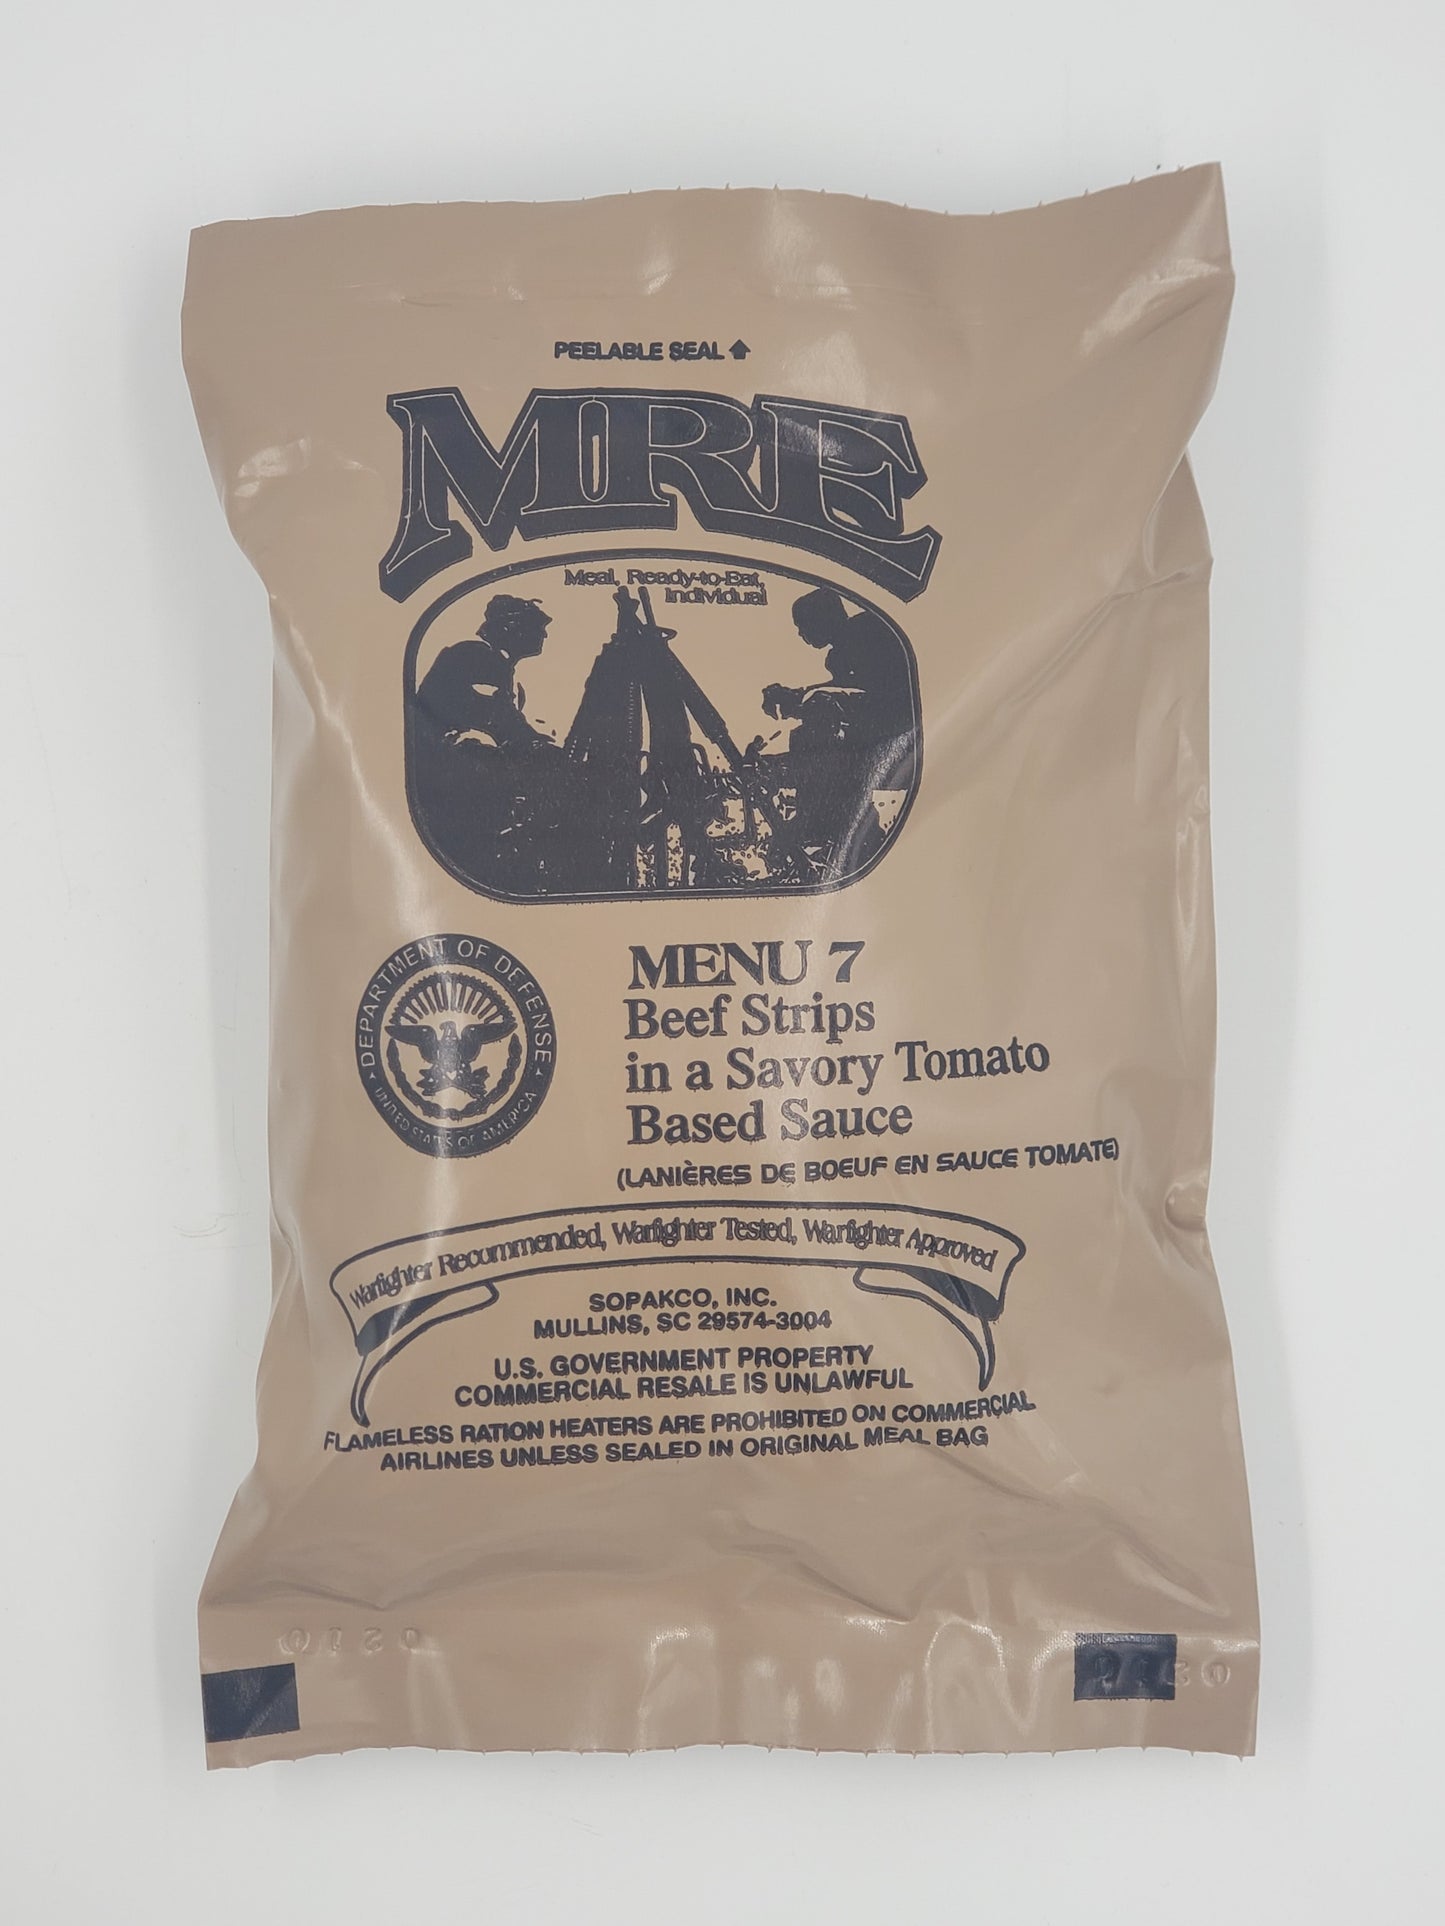 BEEF STRIPS IN A SAVORY TOMATO BASED SAUCE MRE